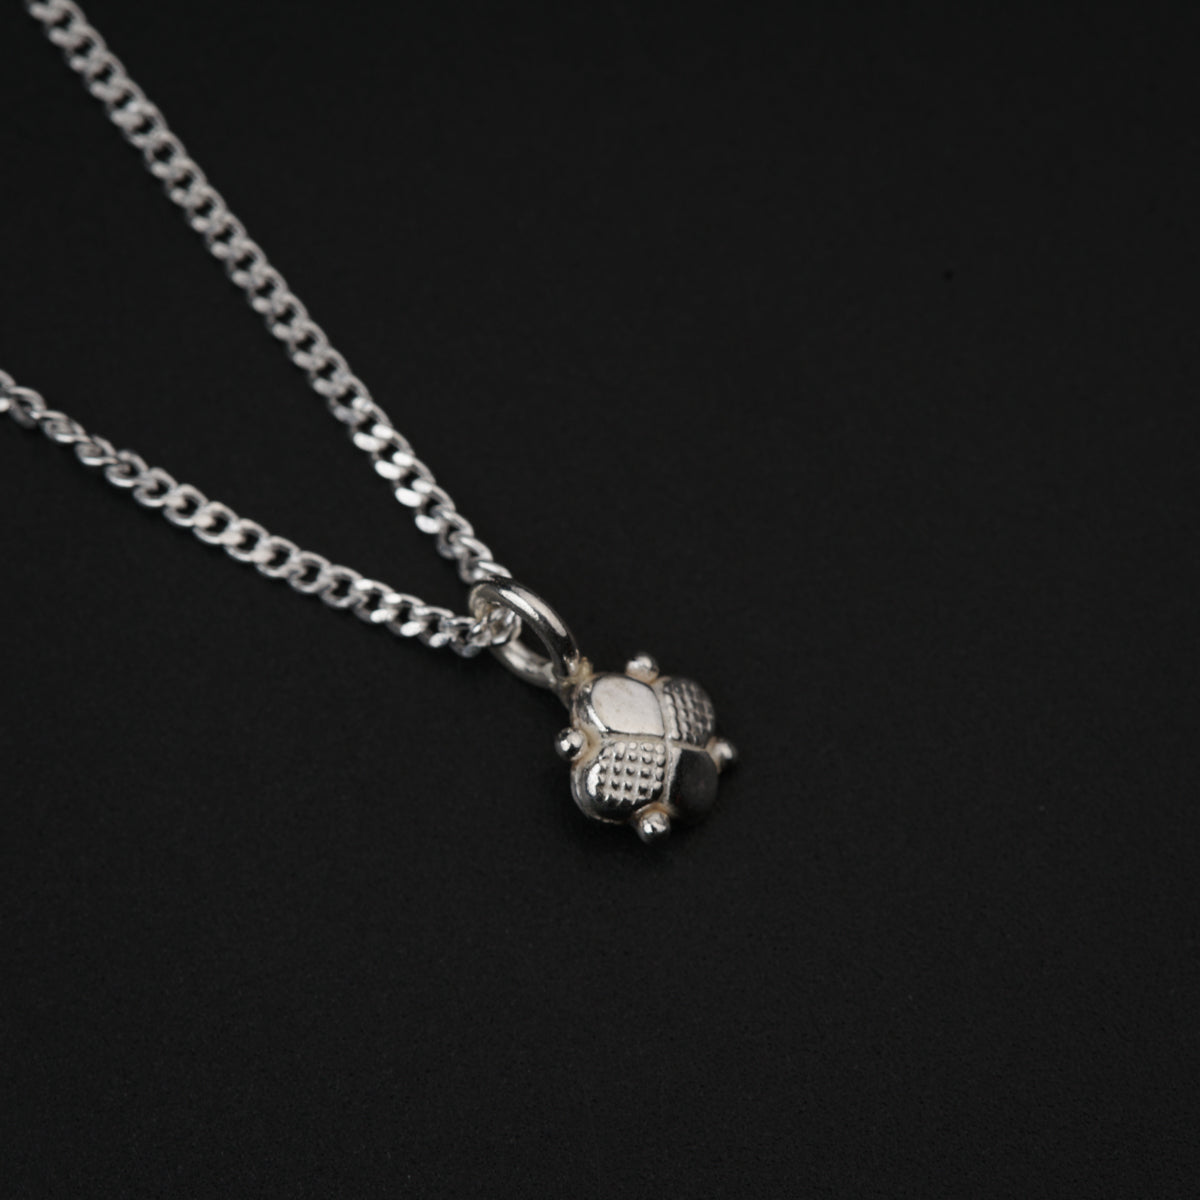 Daily Wear Silver Shiny Clover Necklace